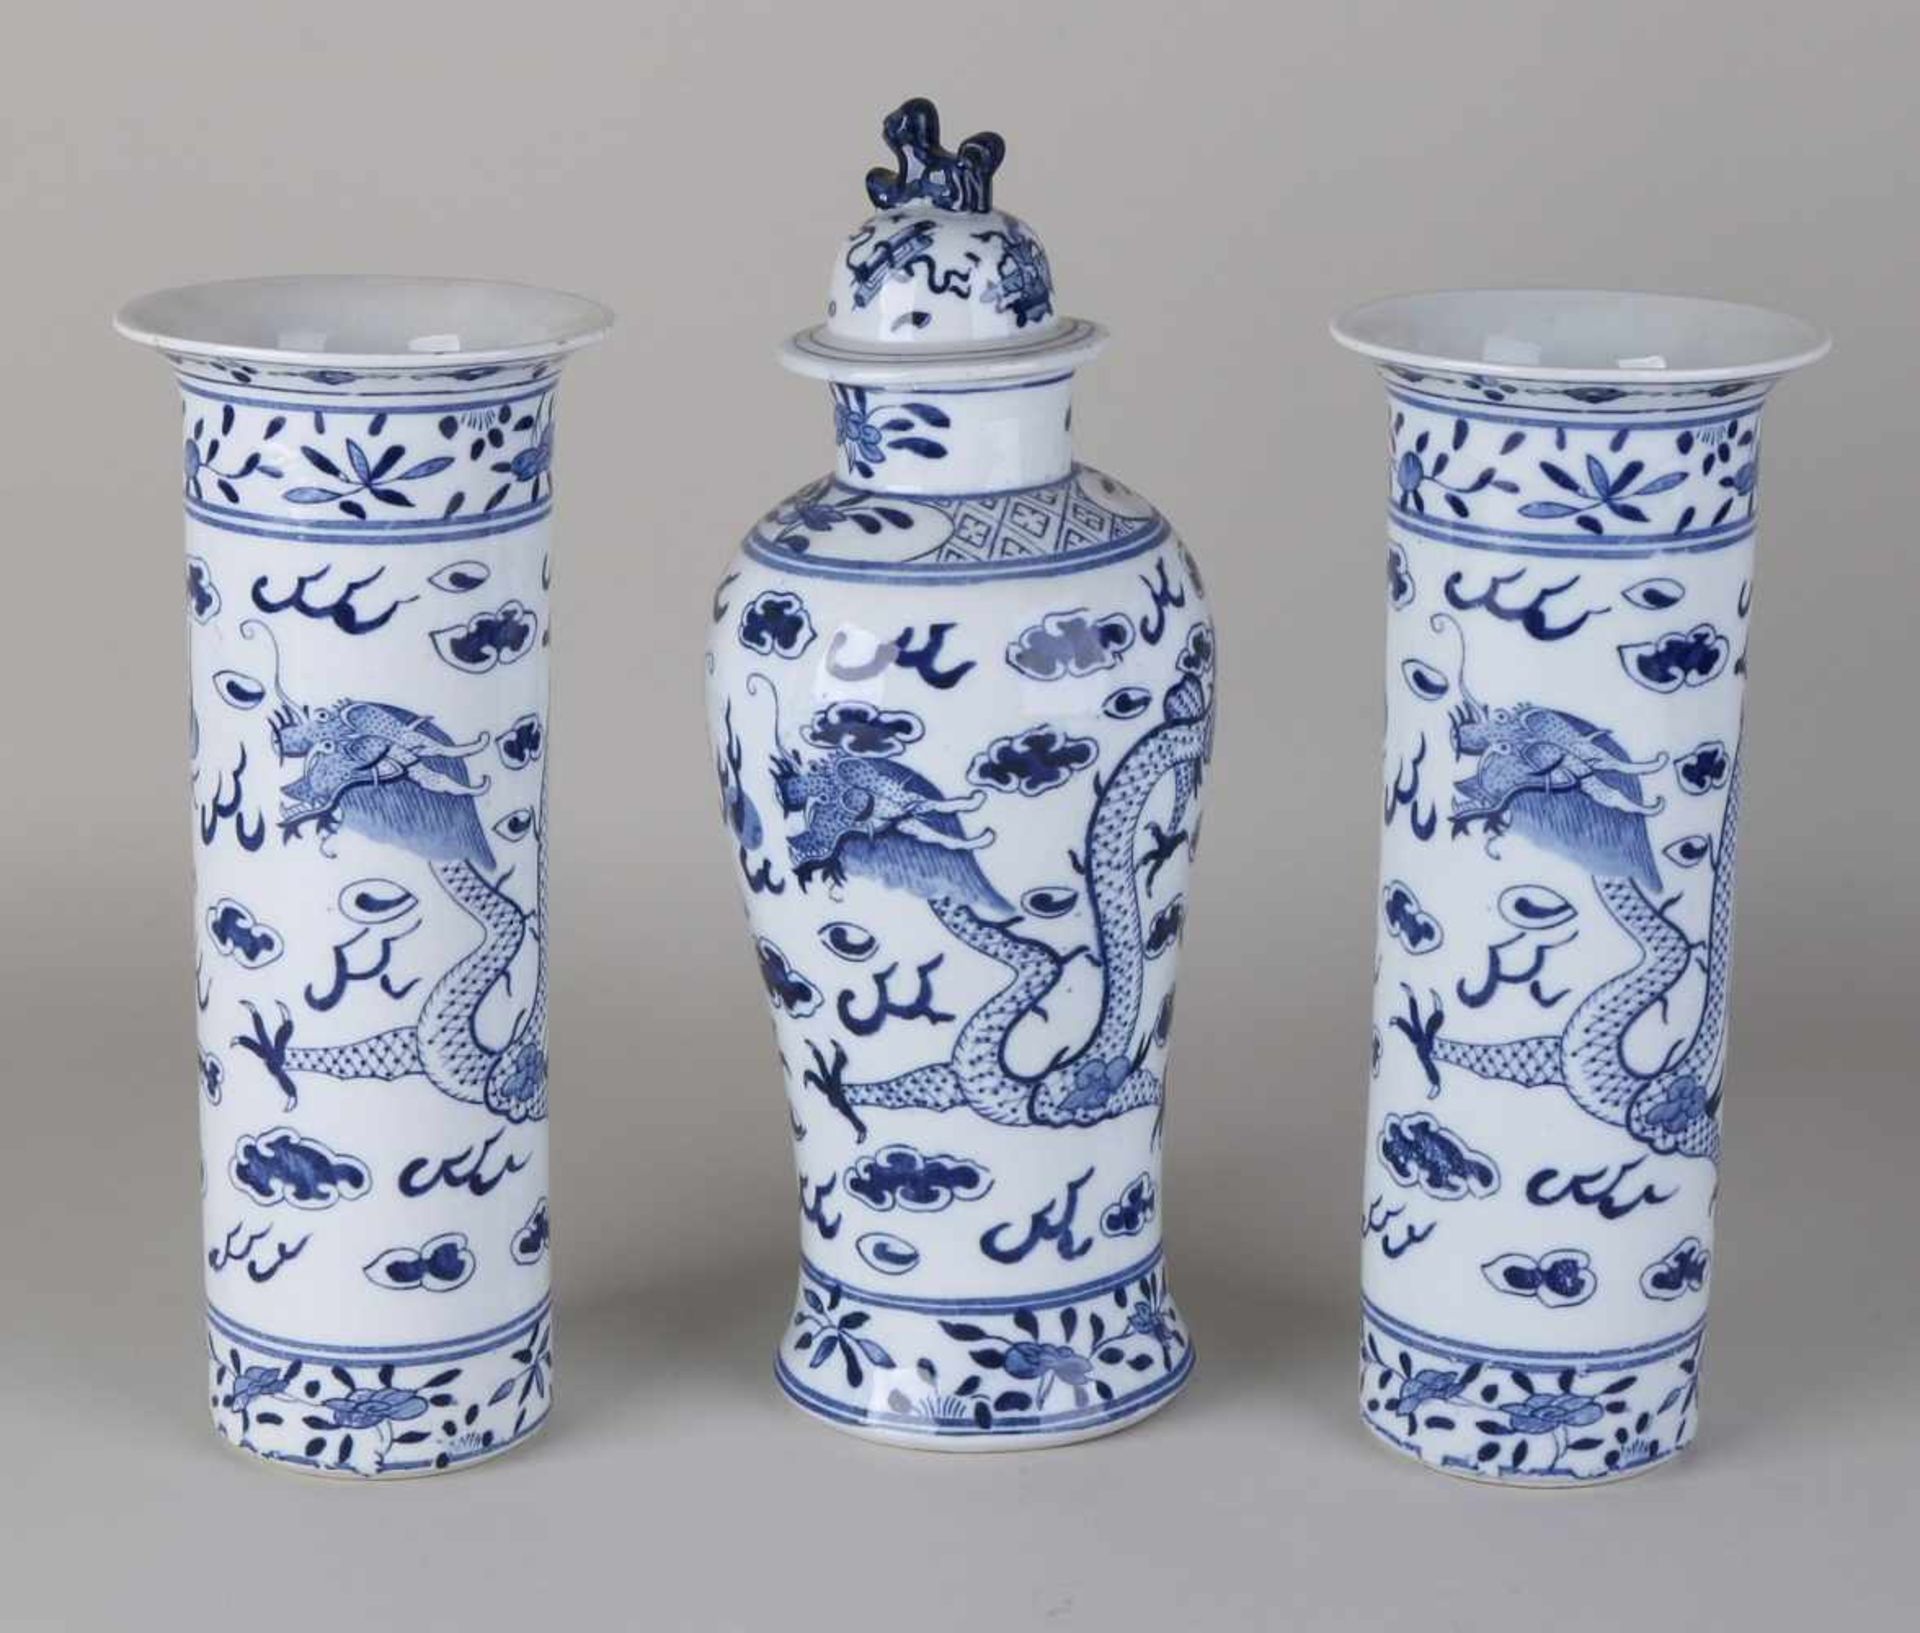 Ancient Chinese porcelain cupboard set with dragons and bottom marks. Dimensions: 25 - 30 cm. In